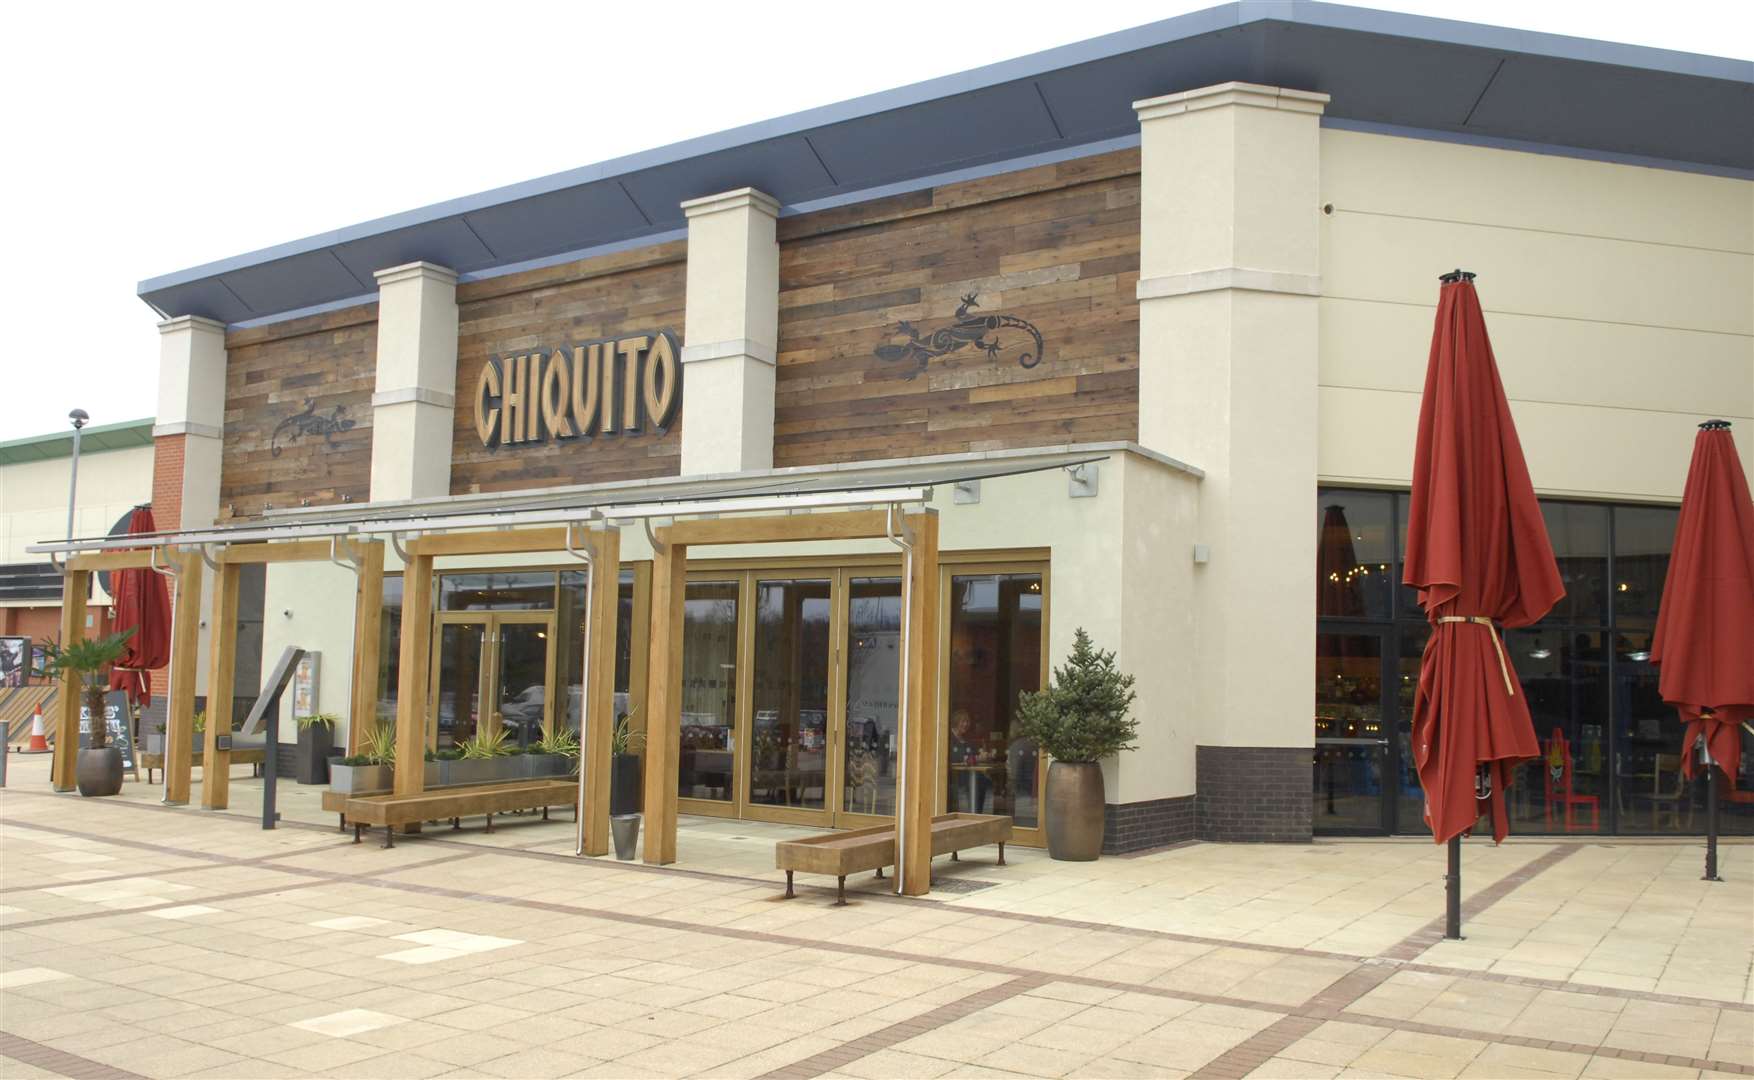 Chiquito, in Eureka Leisure Park, Ashford. Picture: Martin Apps